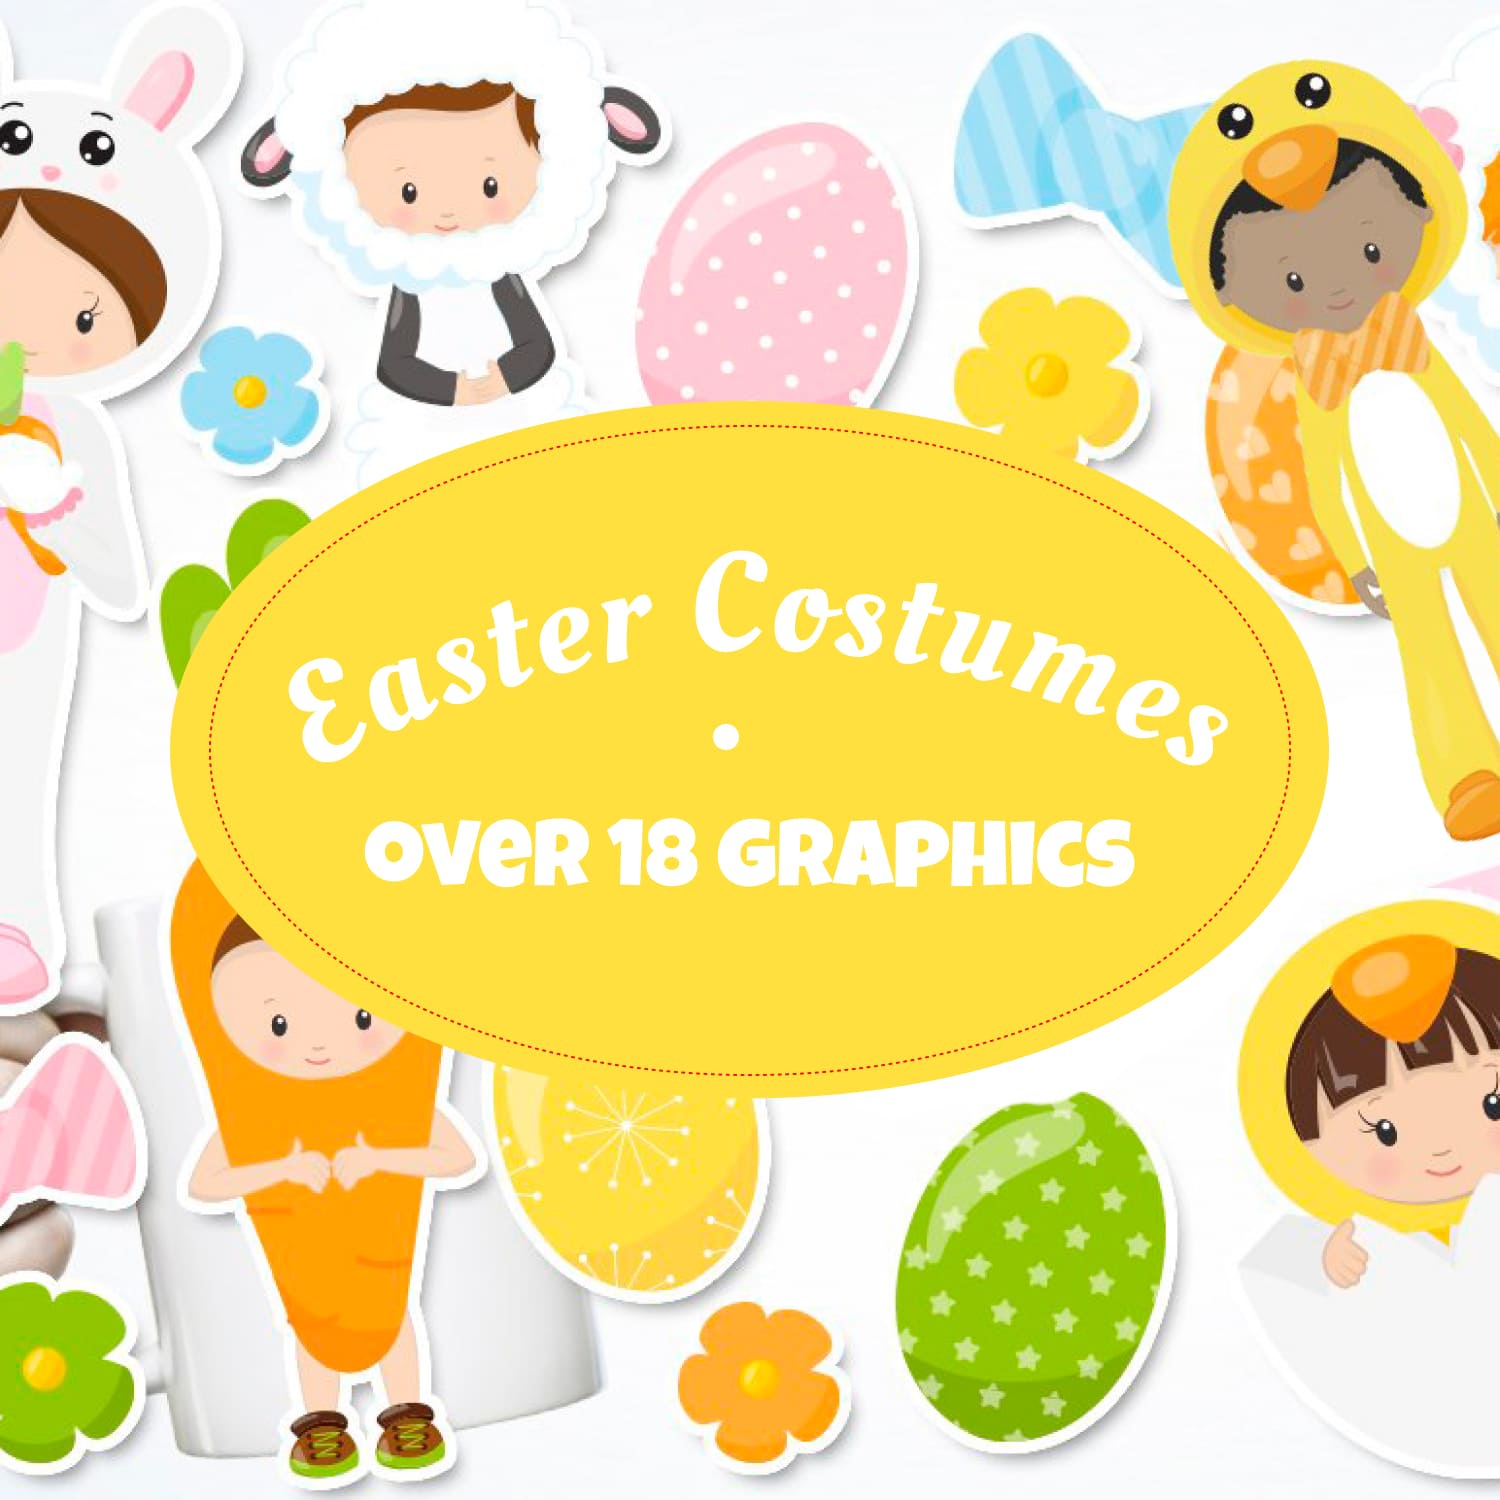 Easter Costumes.